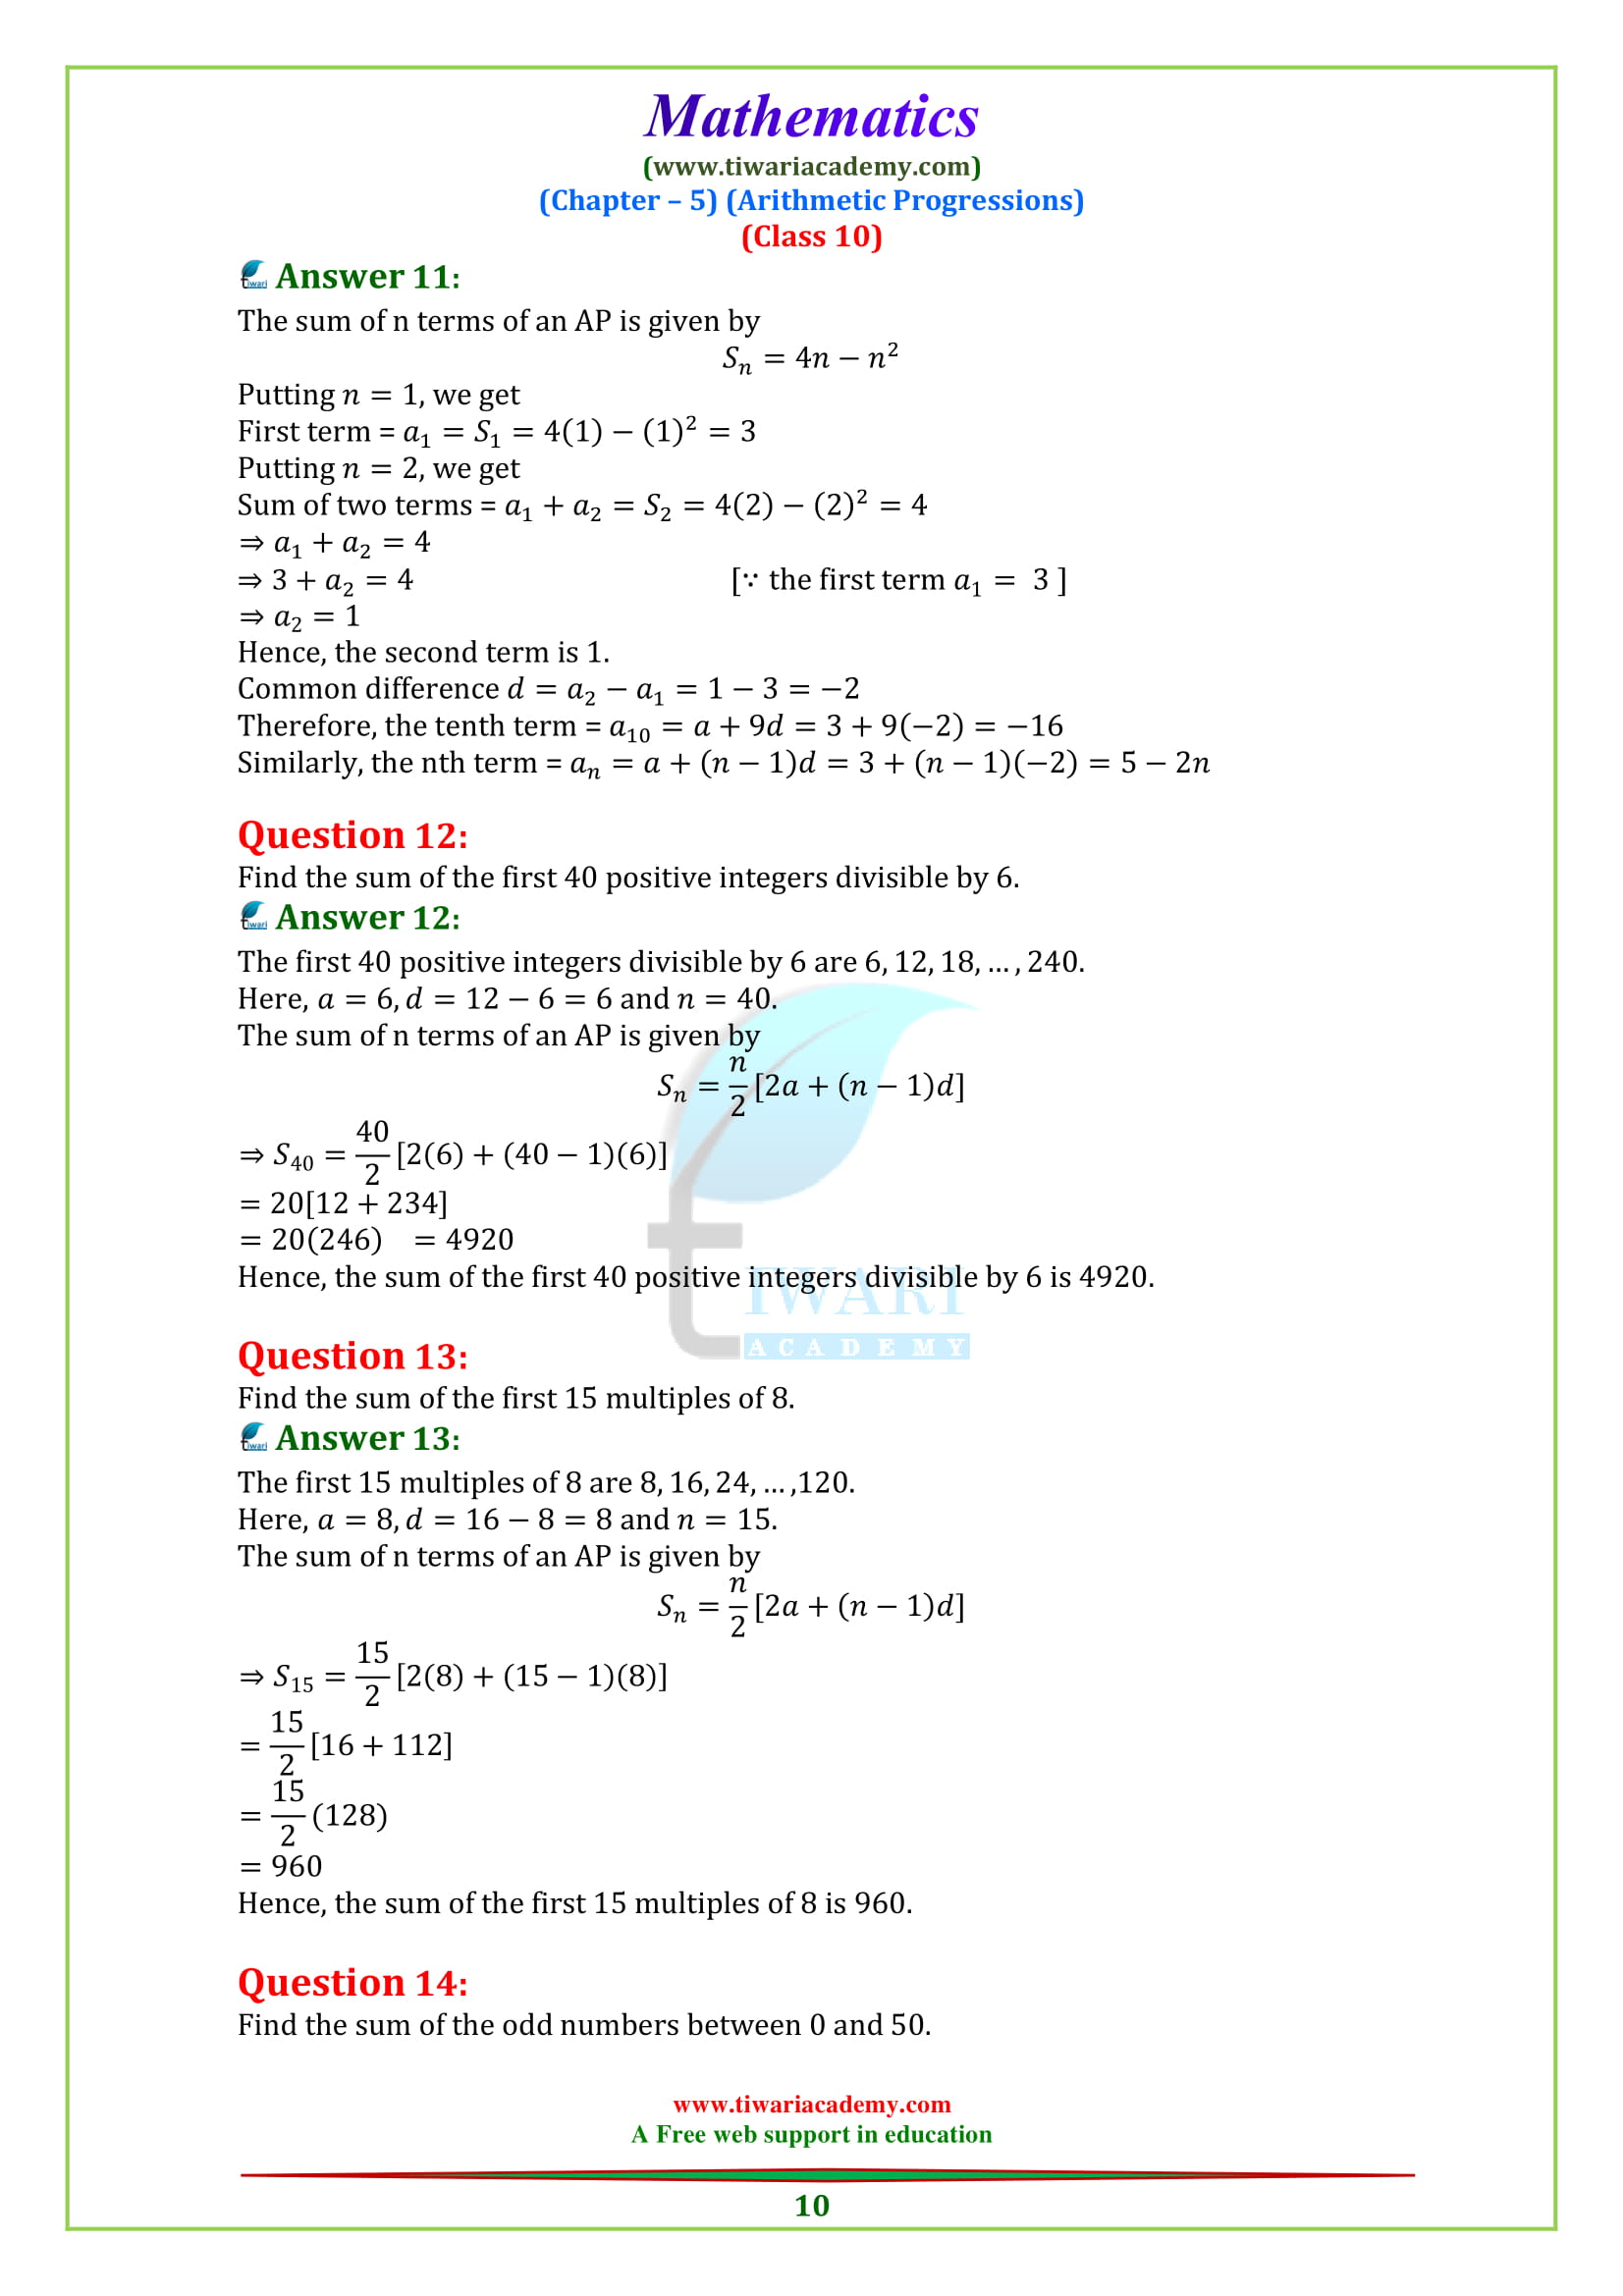 Class 10 Maths Chapter 5 Exercise 5.3 Solutions question 11, 12